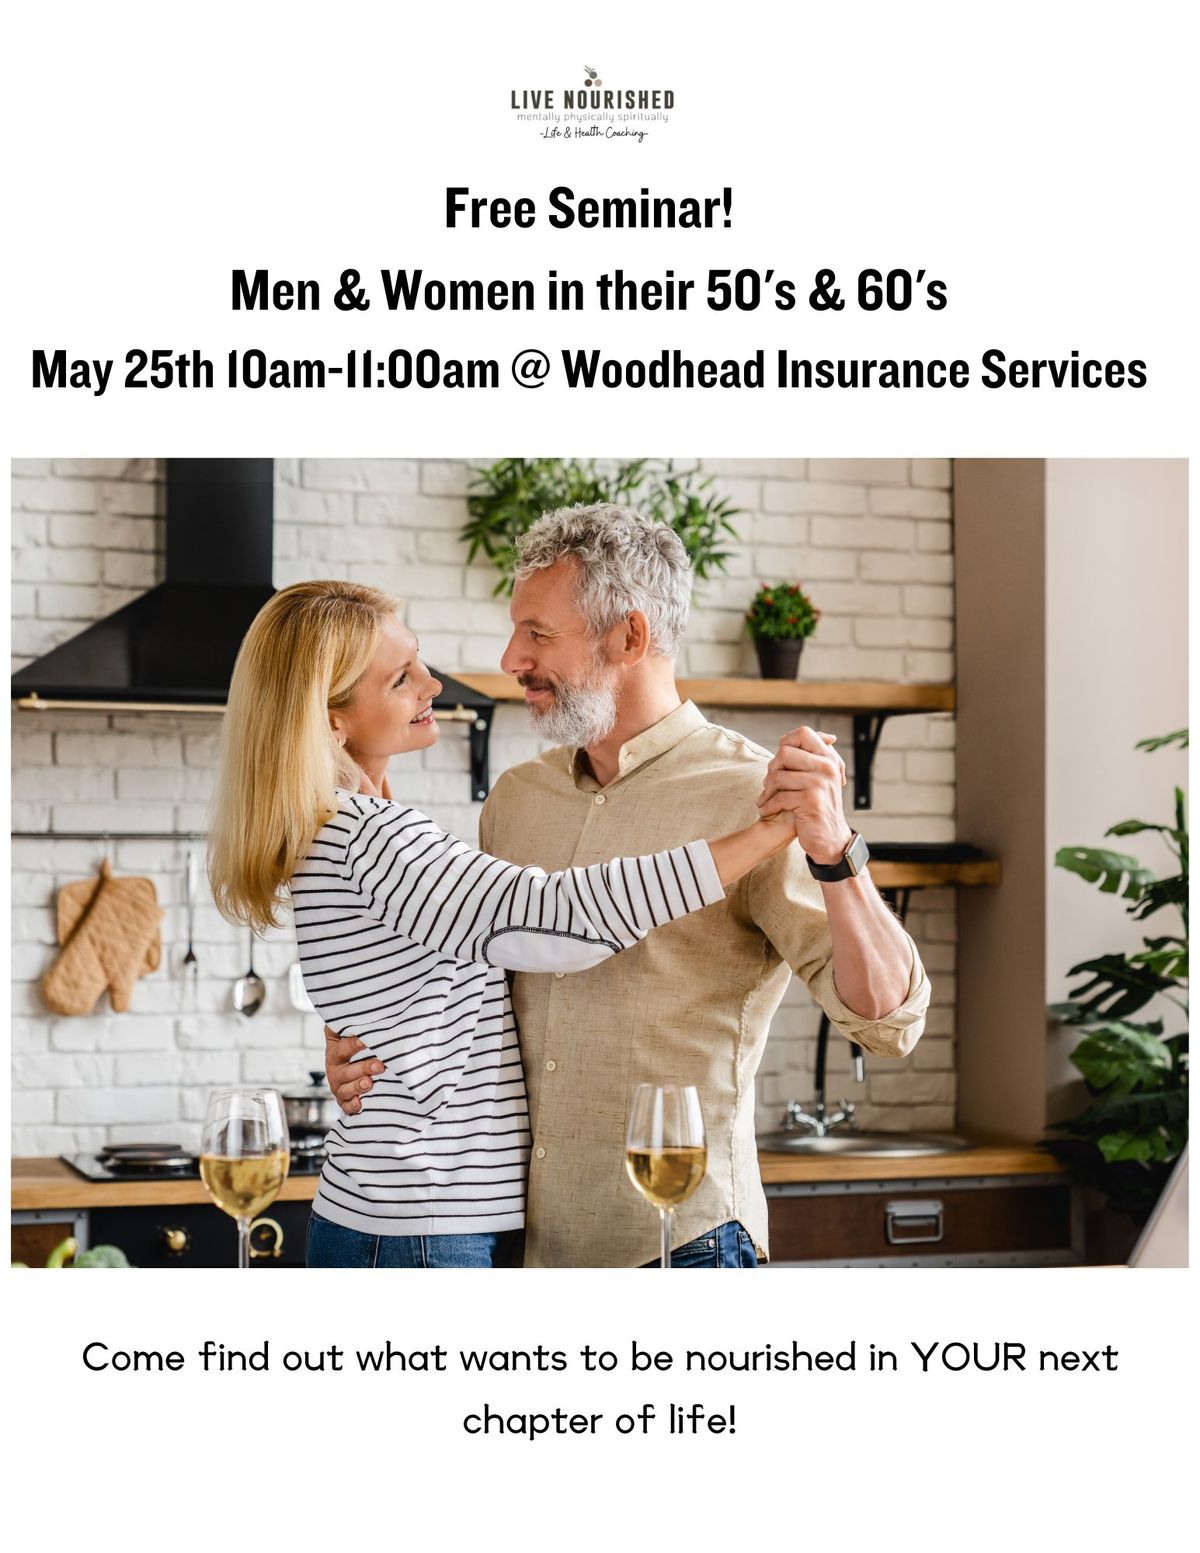 Free Seminar! Live Nourished in Your 50's & 60's